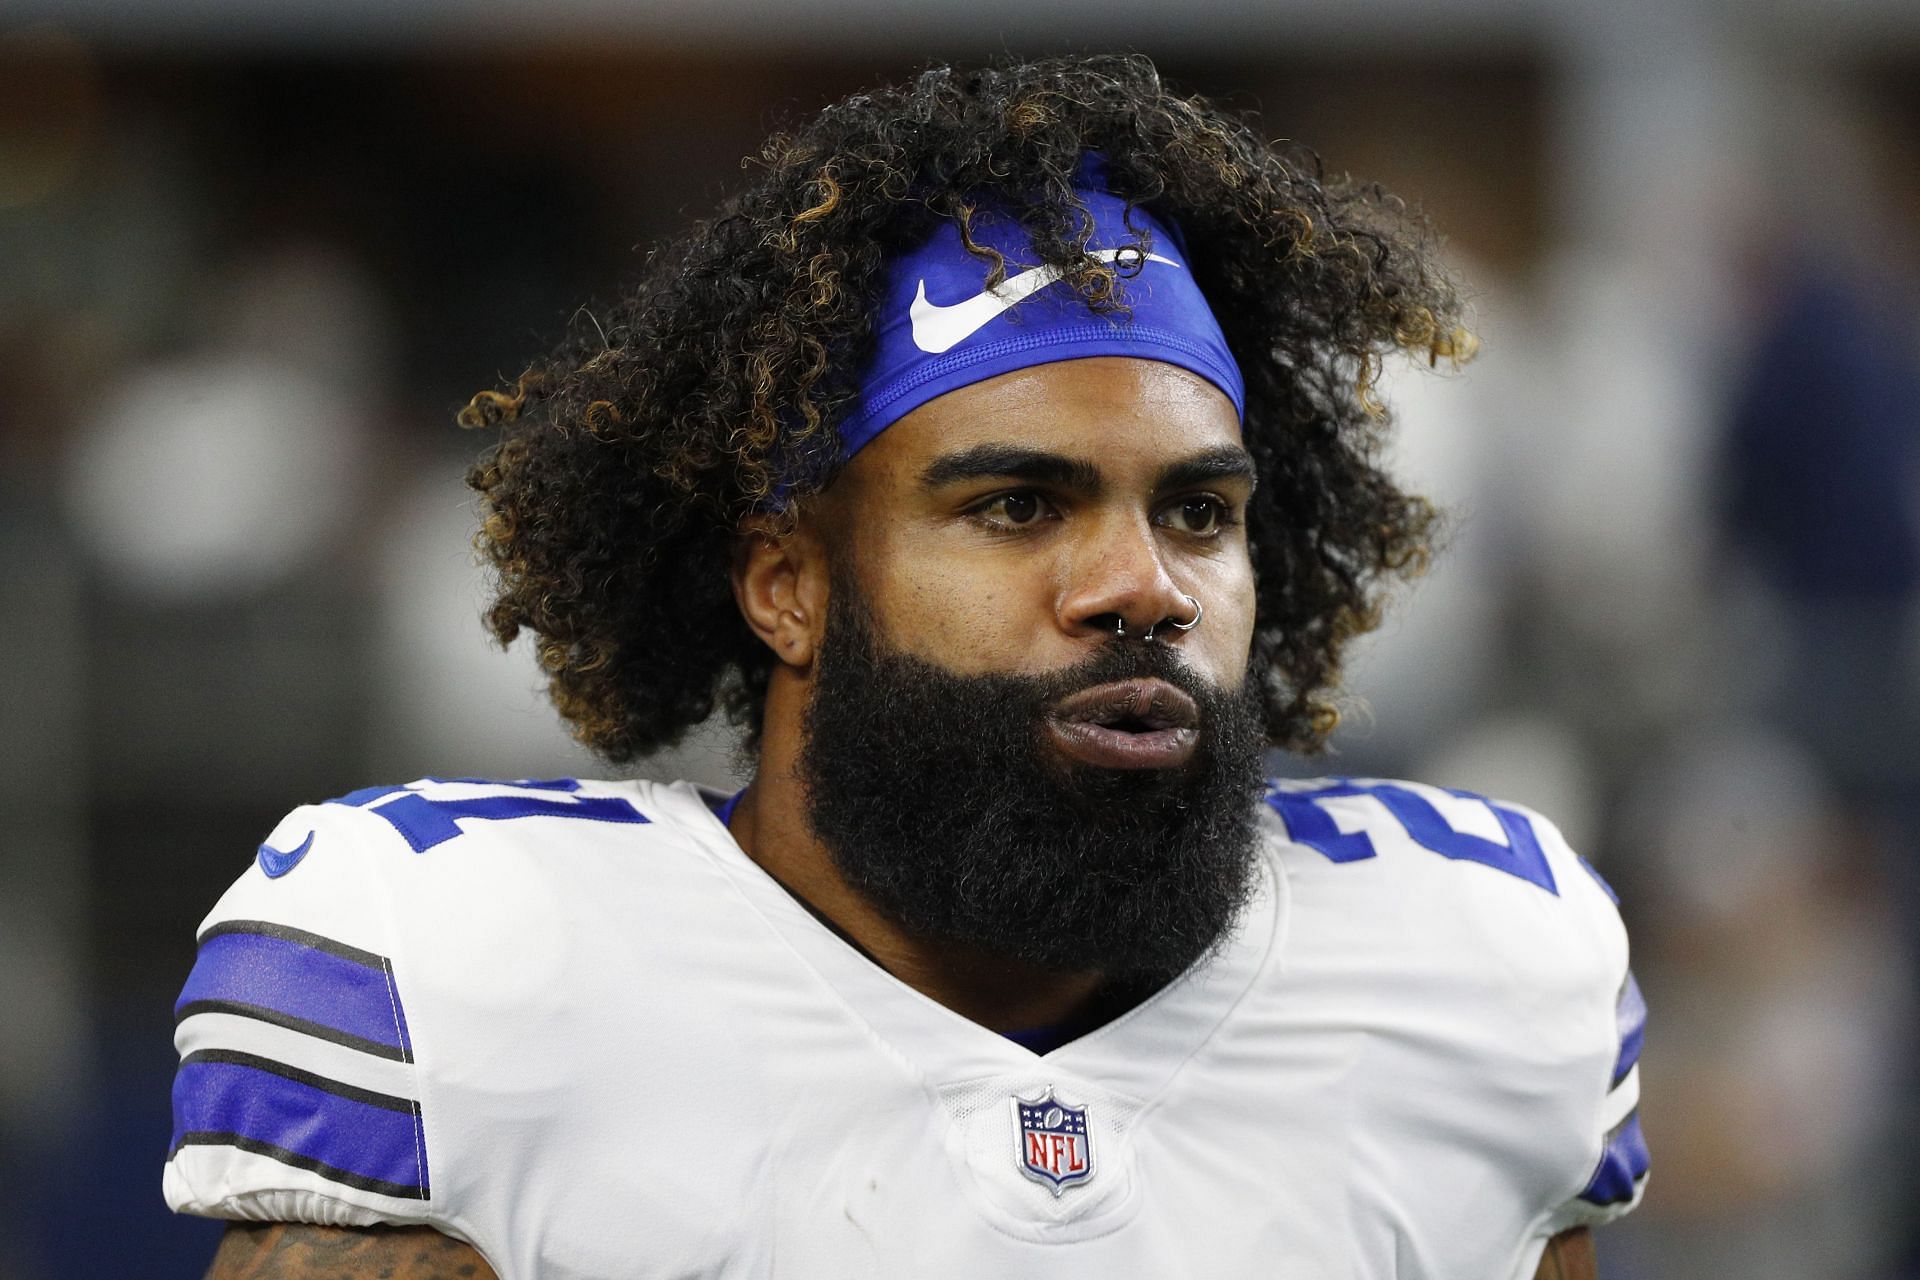 Ezekiel Elliot has defied the predictions of NFL analysts for a long time